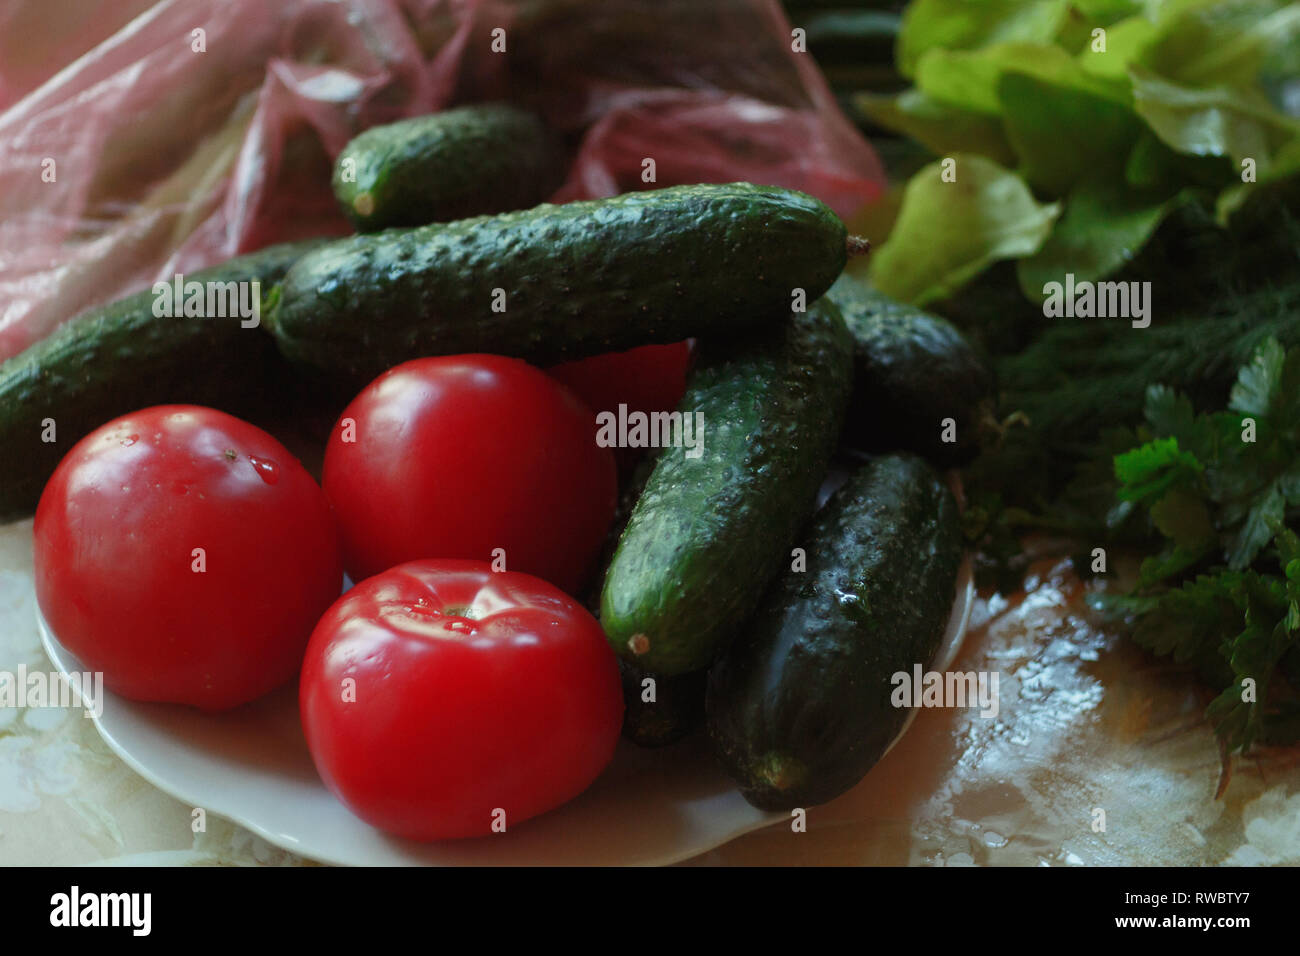 Healthy summer vegetables on the table. Tomatos, cucumbers and greens lying on the table. Stock Photo